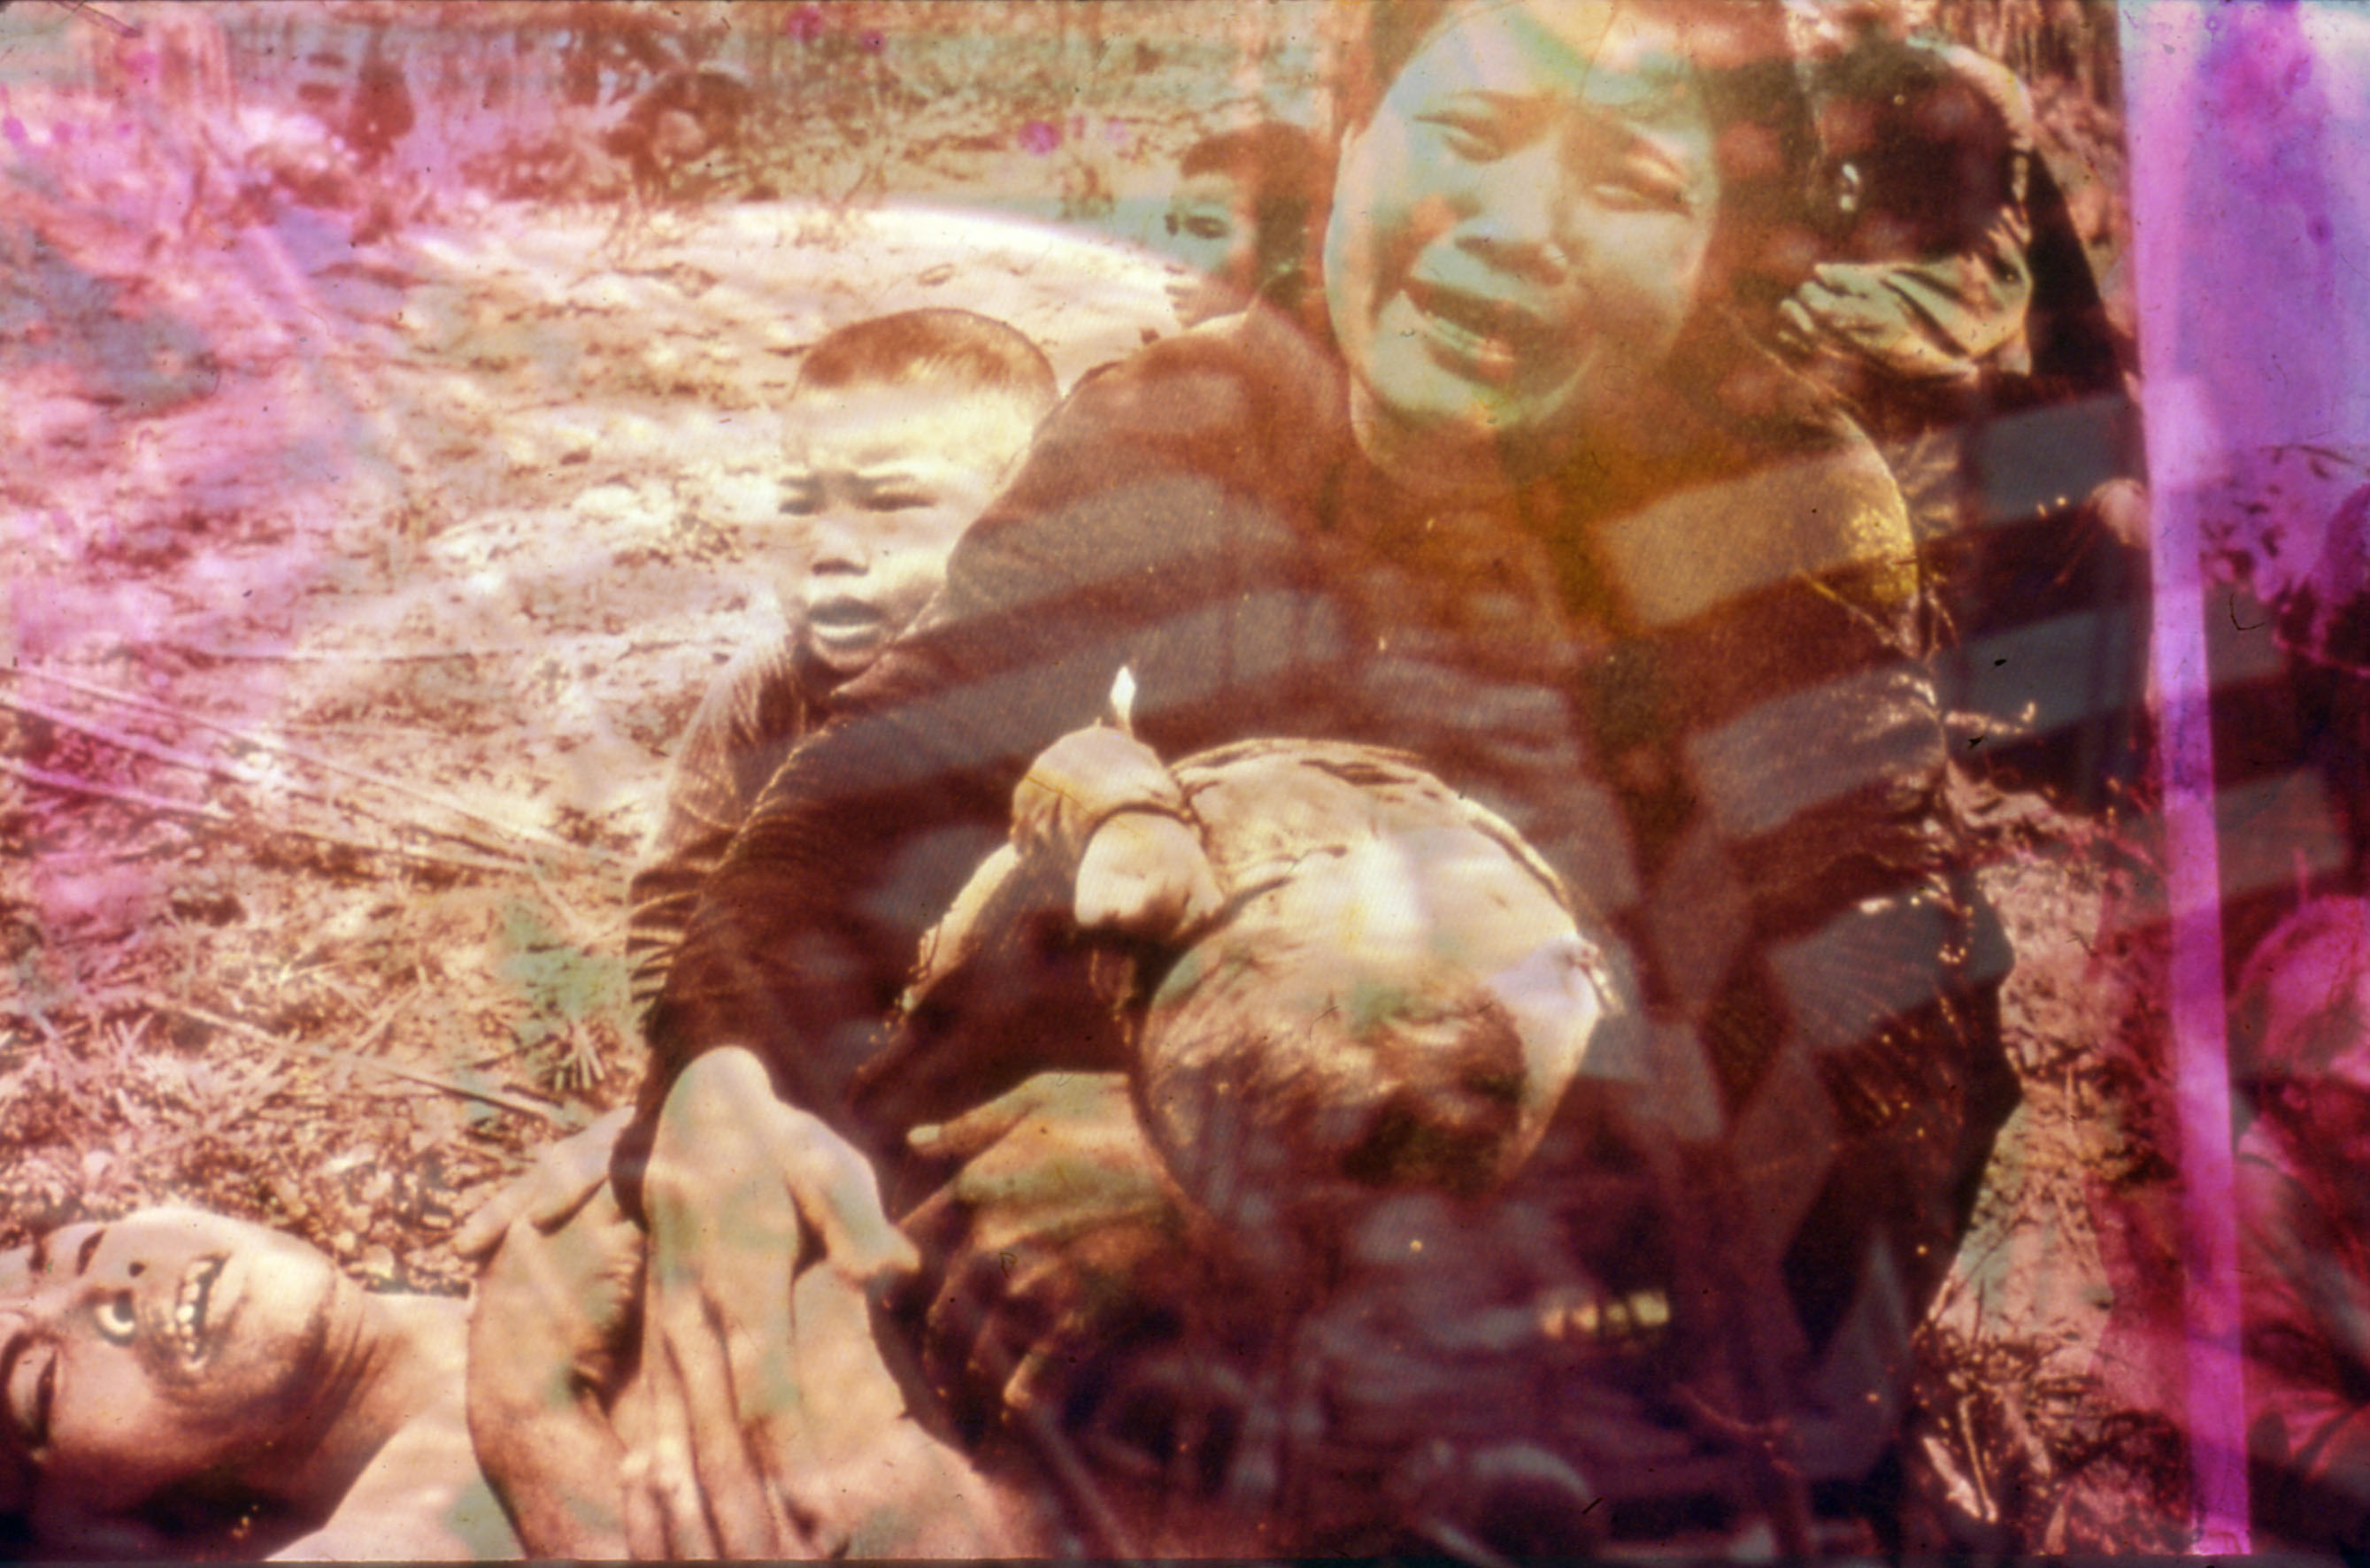 still of several figures crying: one is lying down, another looks directly at the camera, behind them there is a small boy; overlaying the image is a pink filter which abstracts the shot